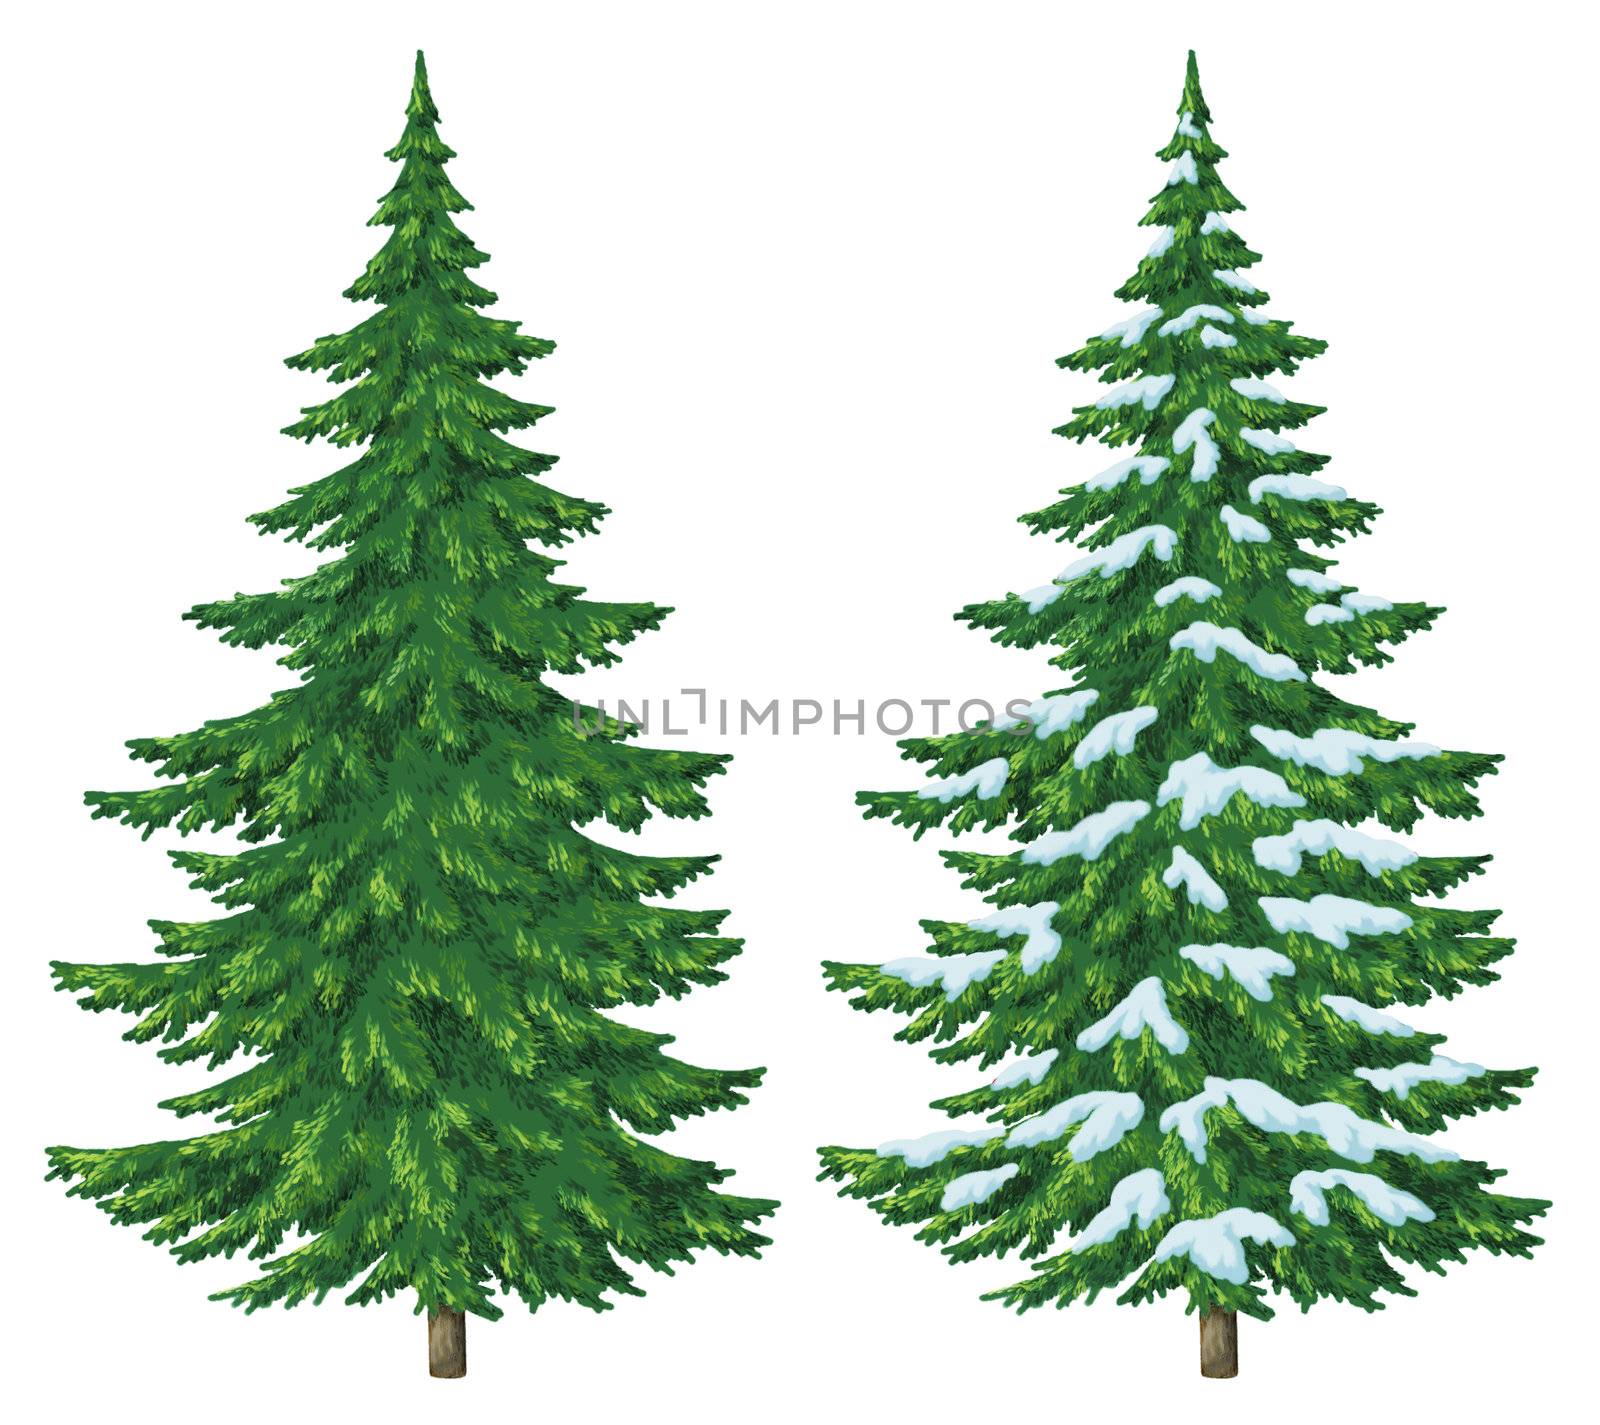 Fir trees, summer and winter with snow, Christmas decoration, isolated on white background